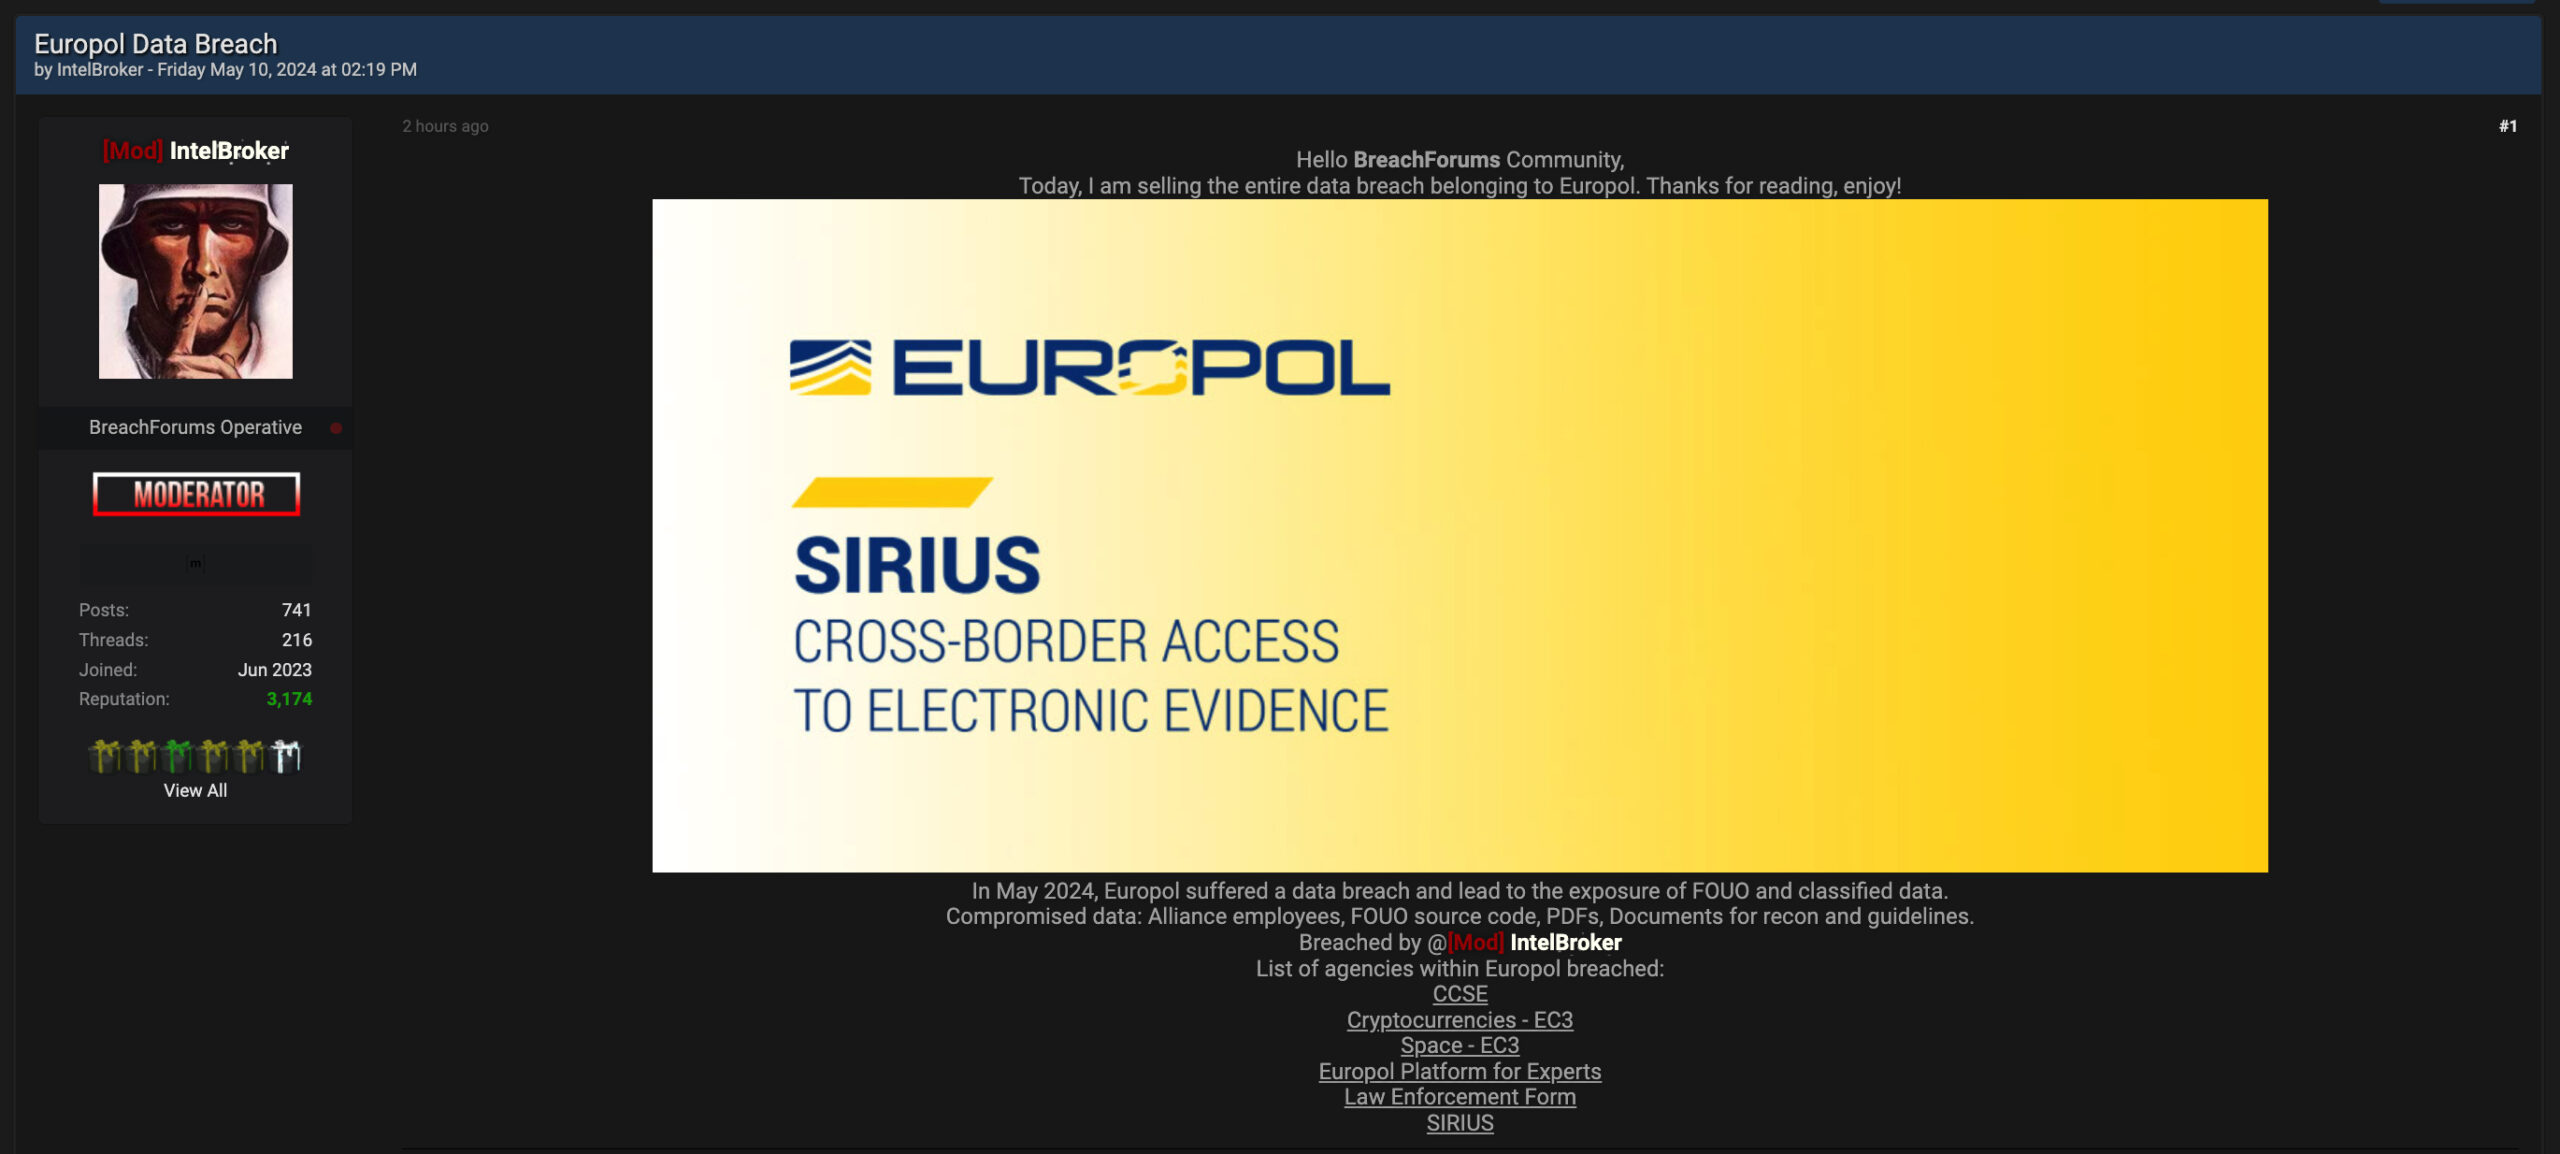 Notorius threat actor IntelBroker claims the hack of the Europol